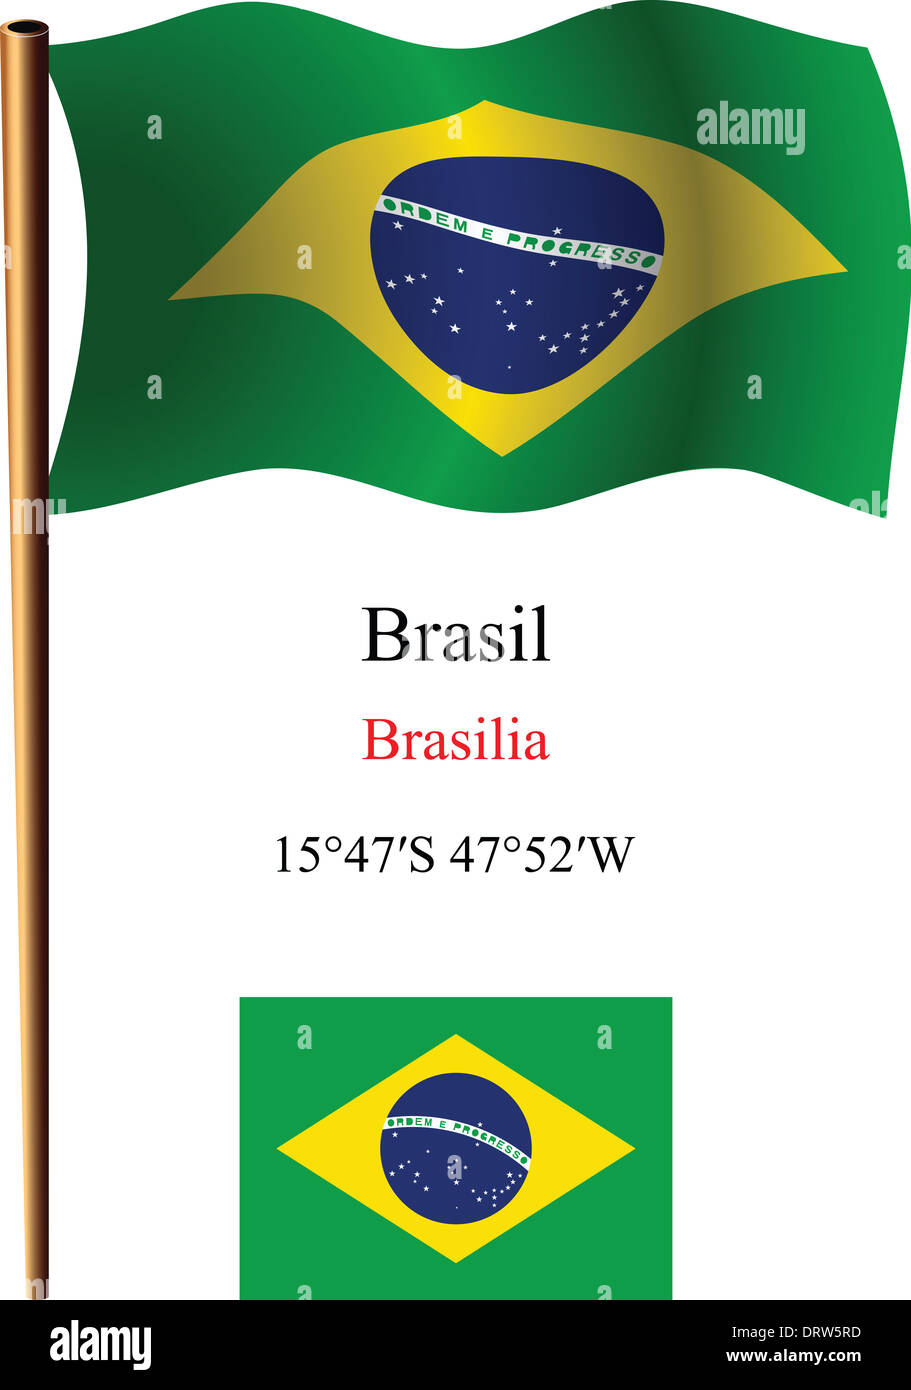 brasil wavy flag and coordinates against white background, vector art illustration, image contains transparency Stock Photo